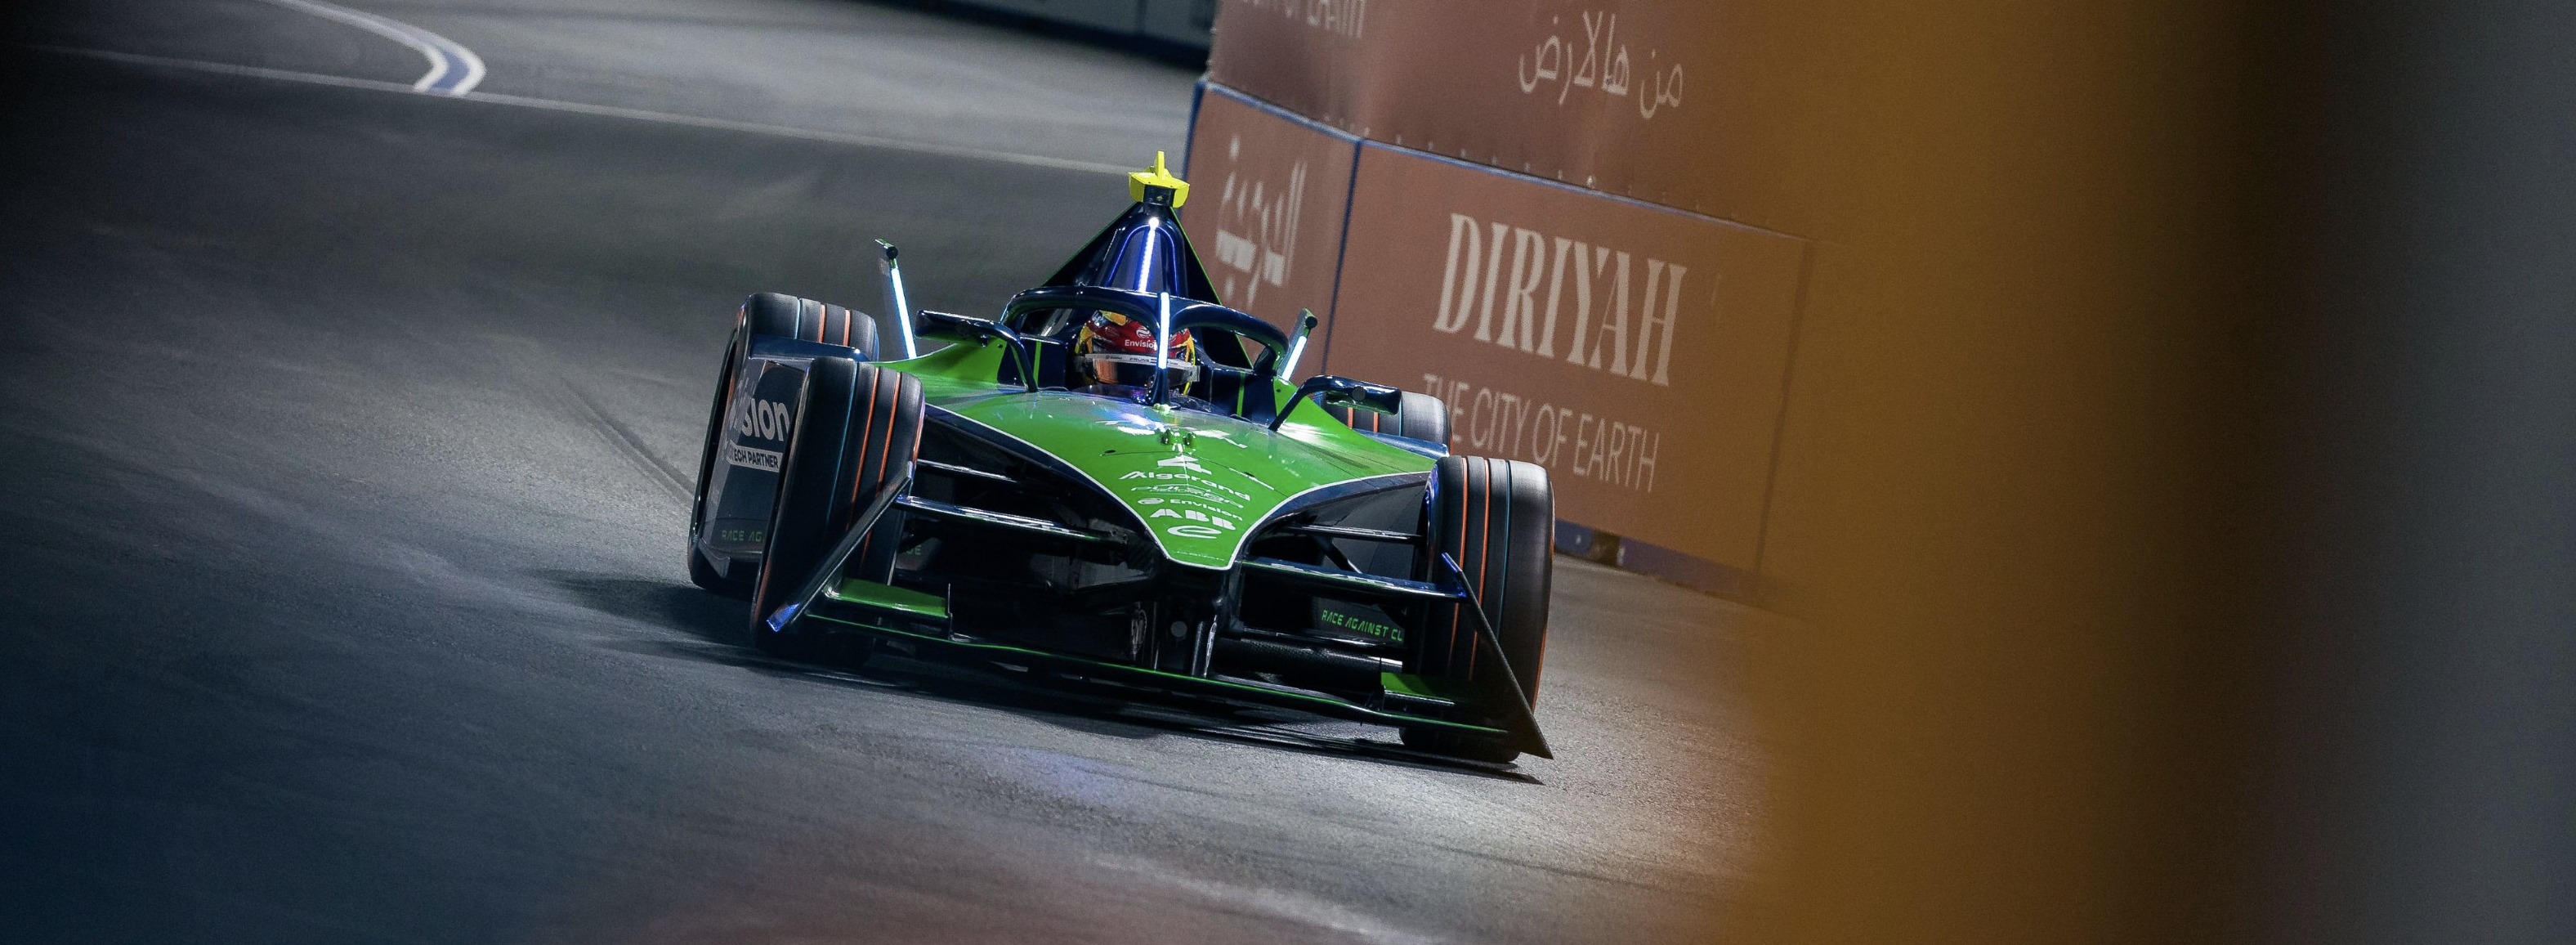 Envision Racing and Frijns bag point on the final lap in Saudi Arabia